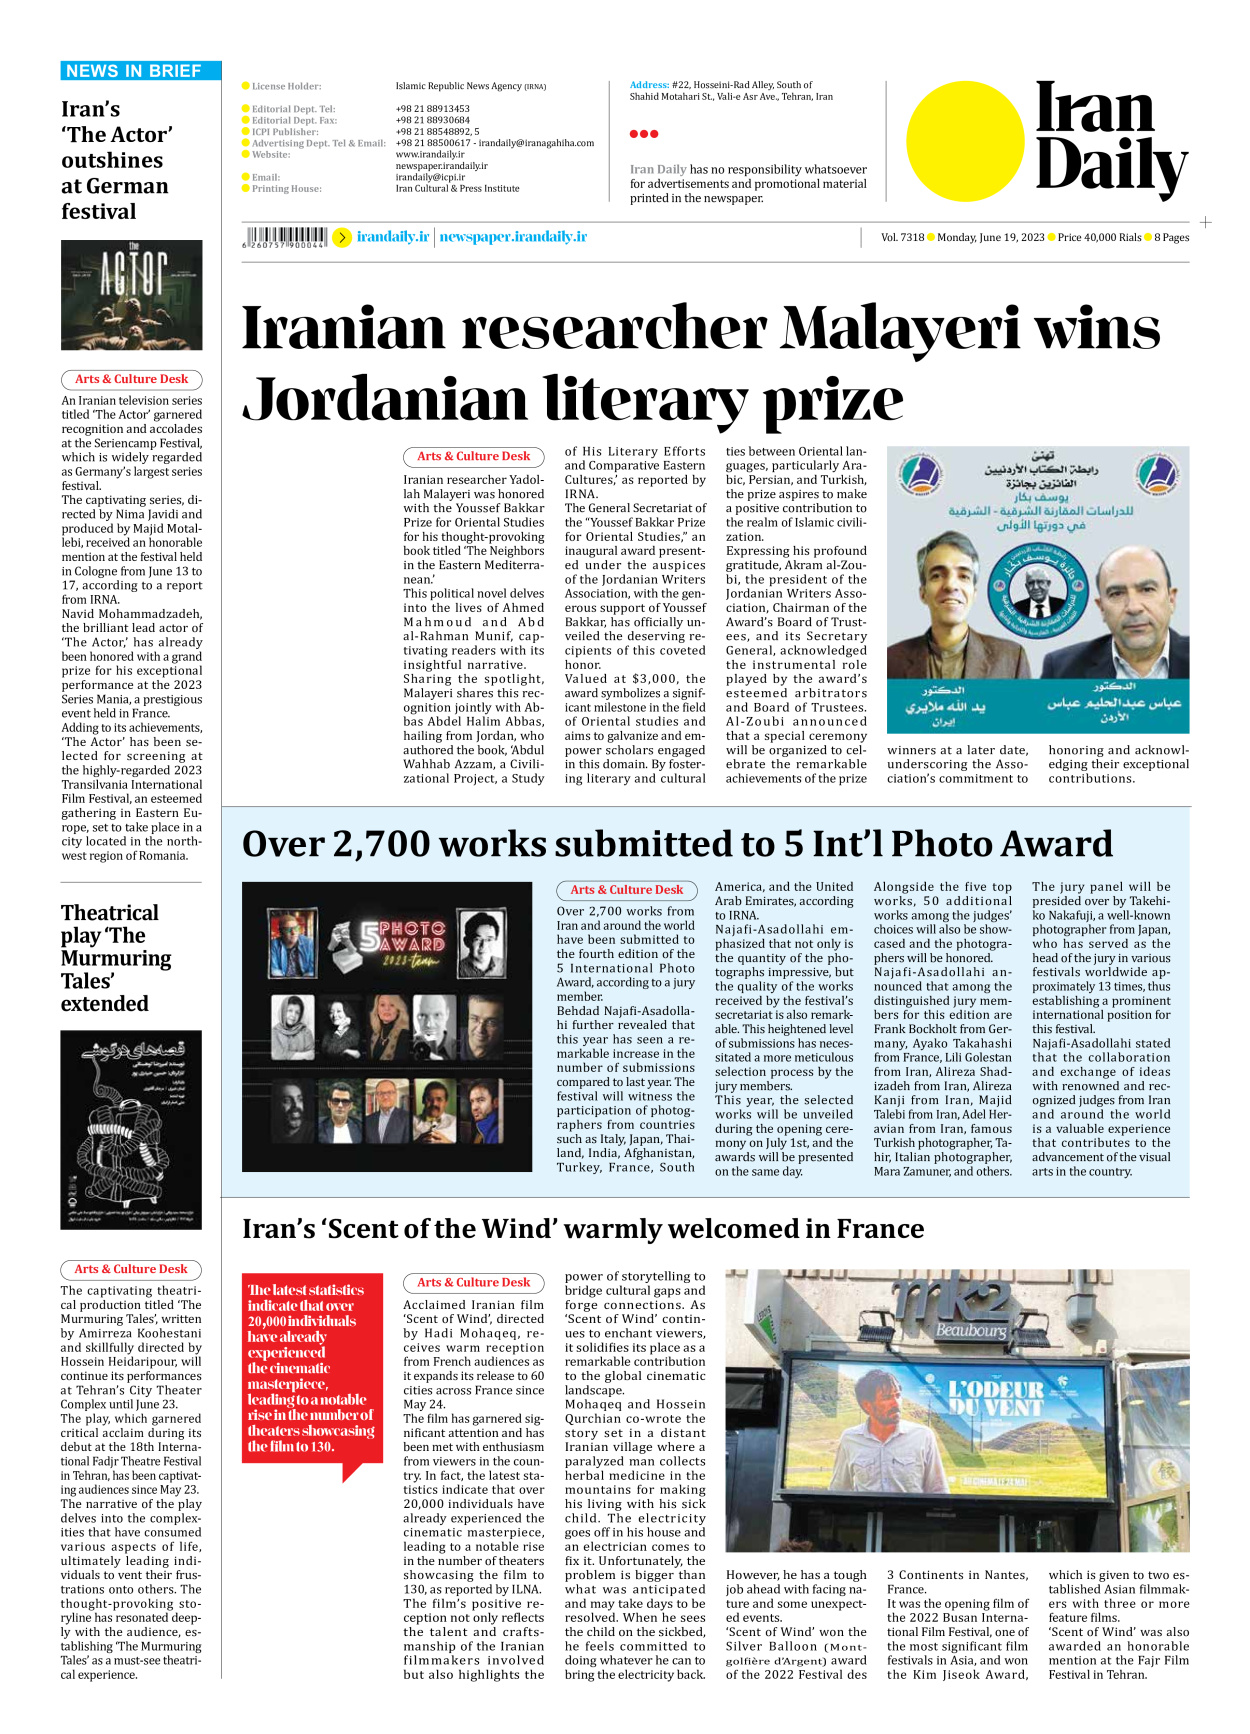 Iran Daily - Number Seven Thousand Three Hundred and Eighteen - 19 June 2023 - Page 8